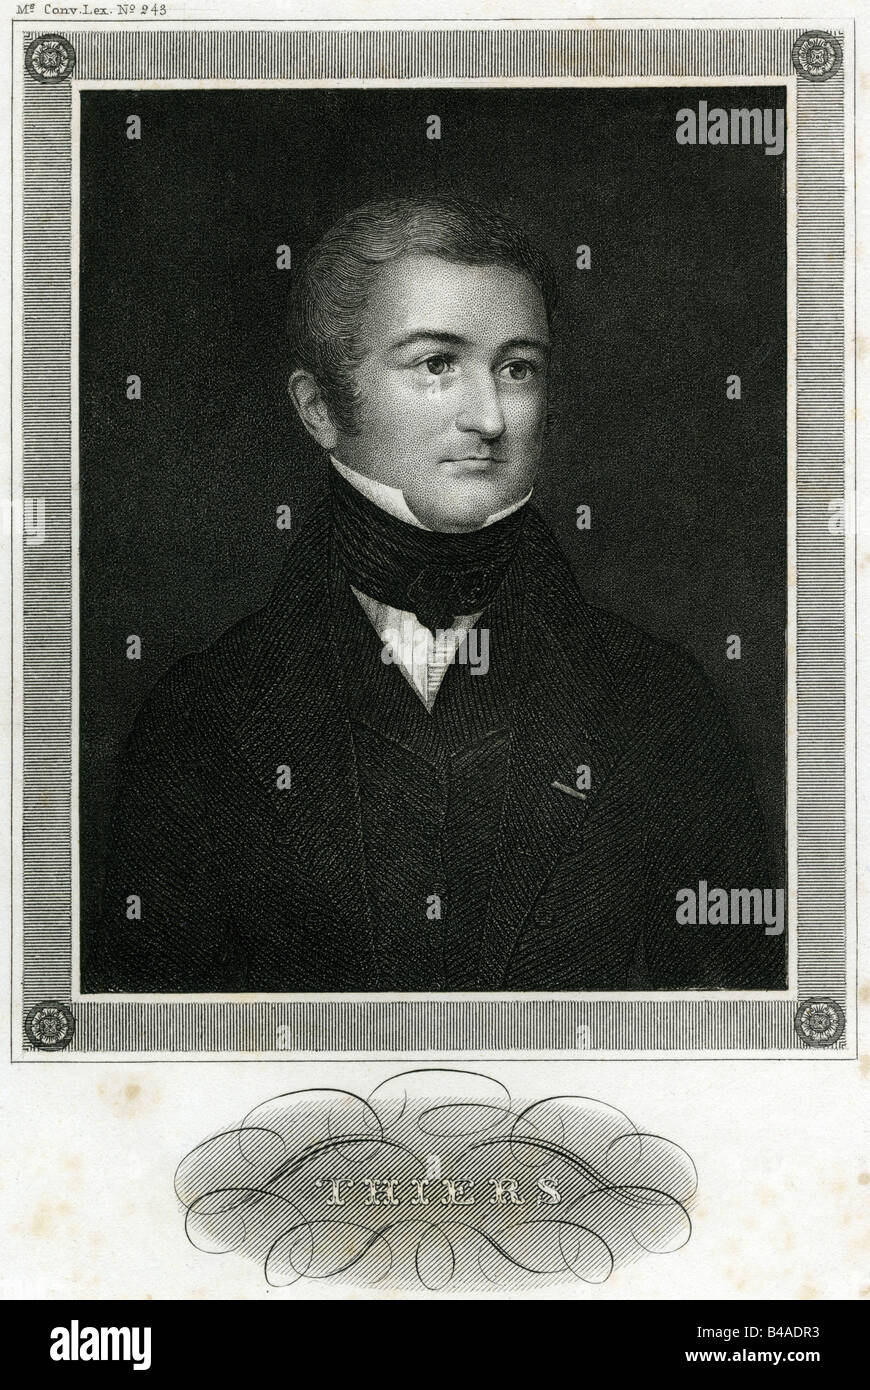 Thiers, Adolphe, 16.4.1797 - 3.9.1877, French politician and historian, portrait, steel engraving, Germany, 19th century, Artist's Copyright has not to be cleared Stock Photo